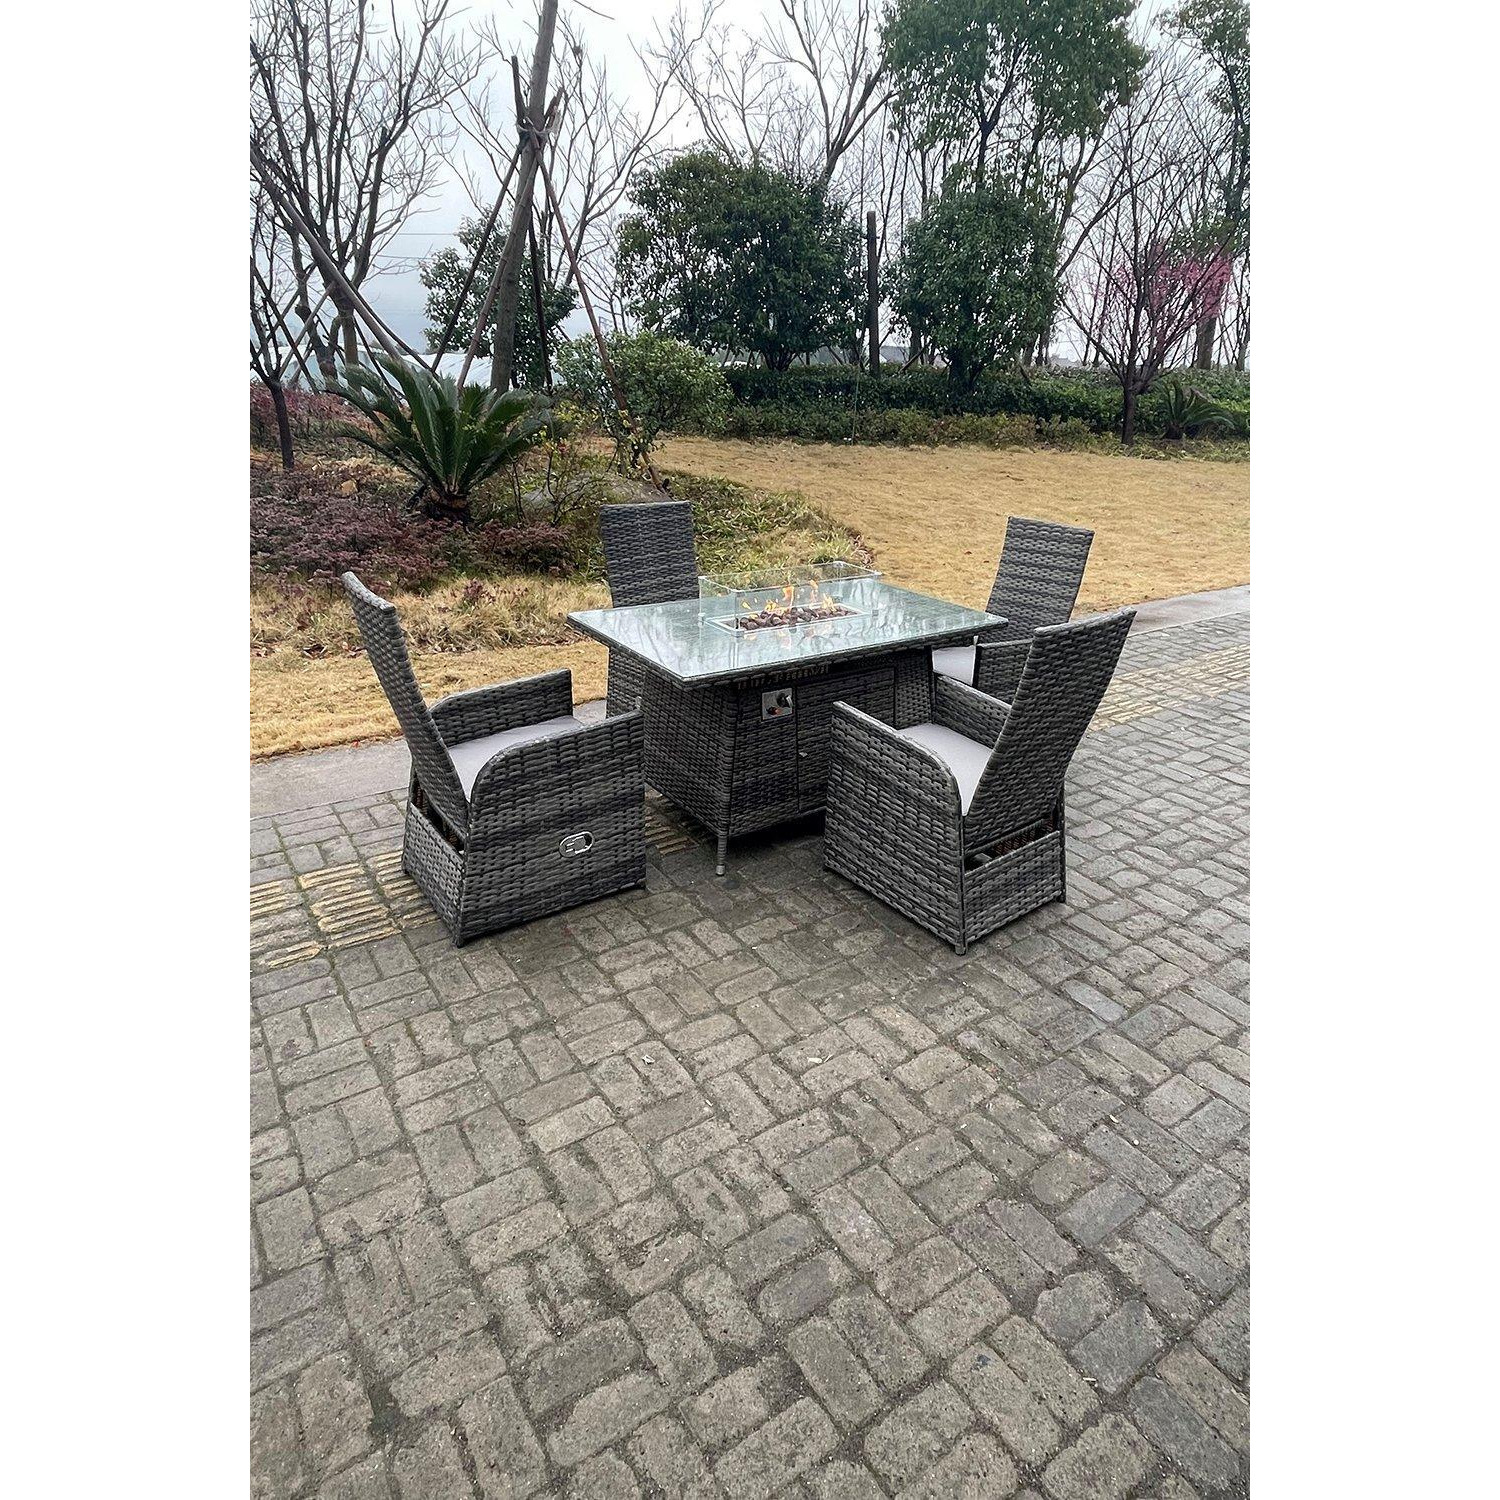 Rattan Gas Fire Pit Oblong Dining Table Gas Heater Adjustable Chair And Table Set 4 Seat - image 1